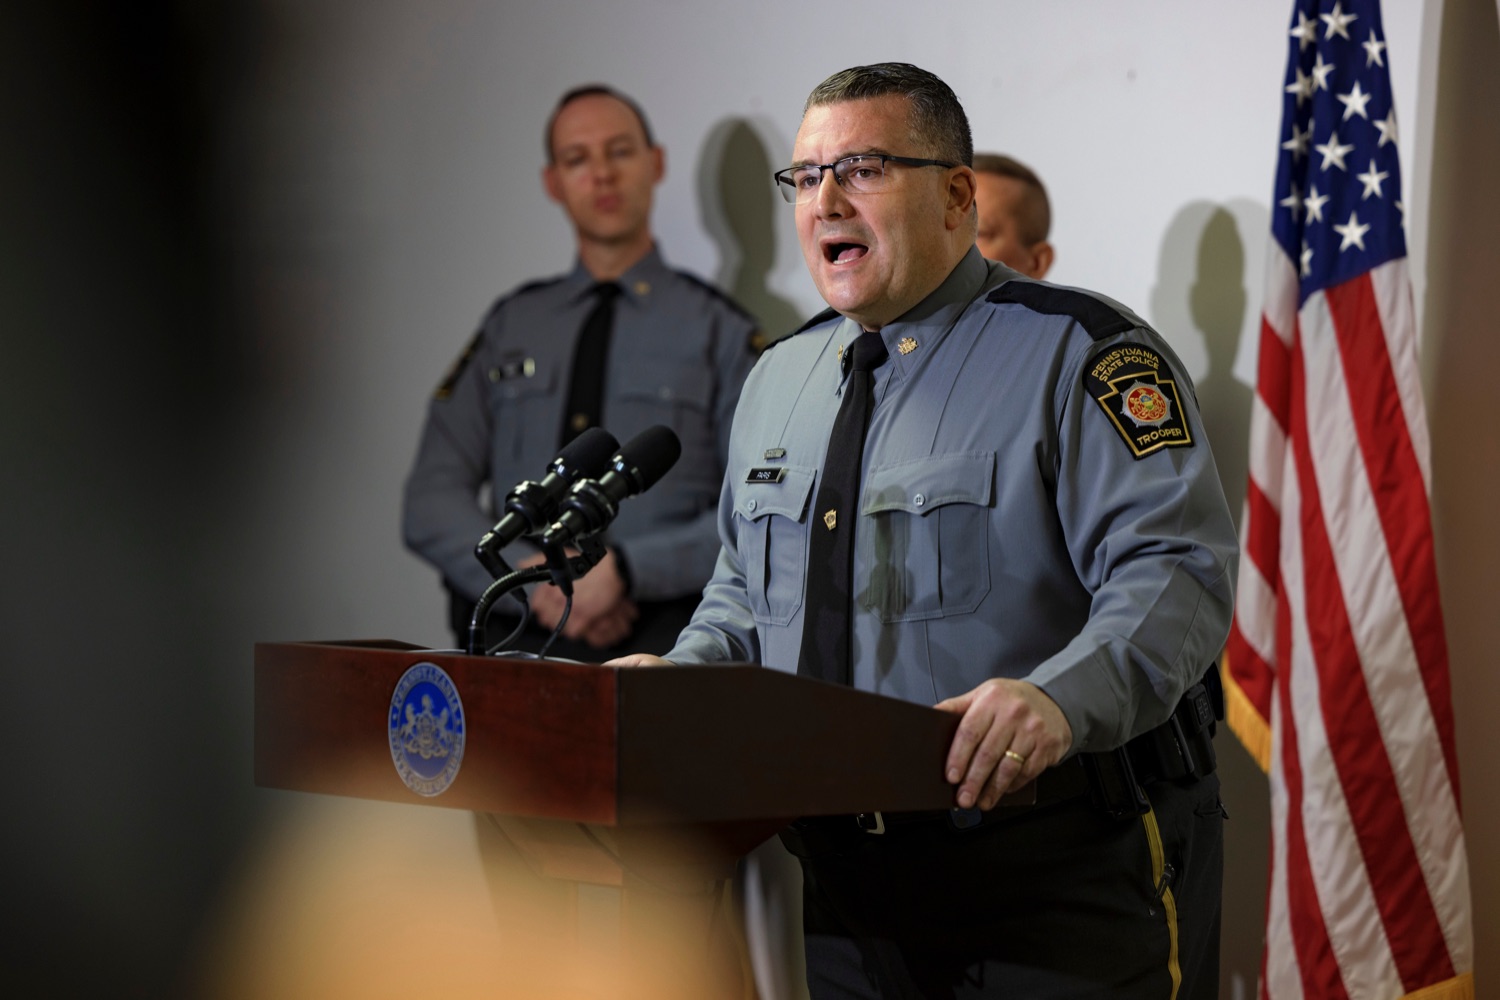 Major Christopher Paris, Area III Commander of State Police, speaks during a press conference to discuss the apprehension of Bryan C. Kohberger inside Monroe County District Attorney Office in Stroudsburg on Tuesday, January 3, 2023. Kohberger was taken into custody early Friday by members of Troop N and the Special Emergency Response Team at a home in Chestnuthill Township, in Monroe County, in connection to the homicides of four University of Idaho students on November 13.<br><a href="https://filesource.amperwave.net/commonwealthofpa/photo/22481_PSP_Kohberger_NK_002.JPG" target="_blank">⇣ Download Photo</a>